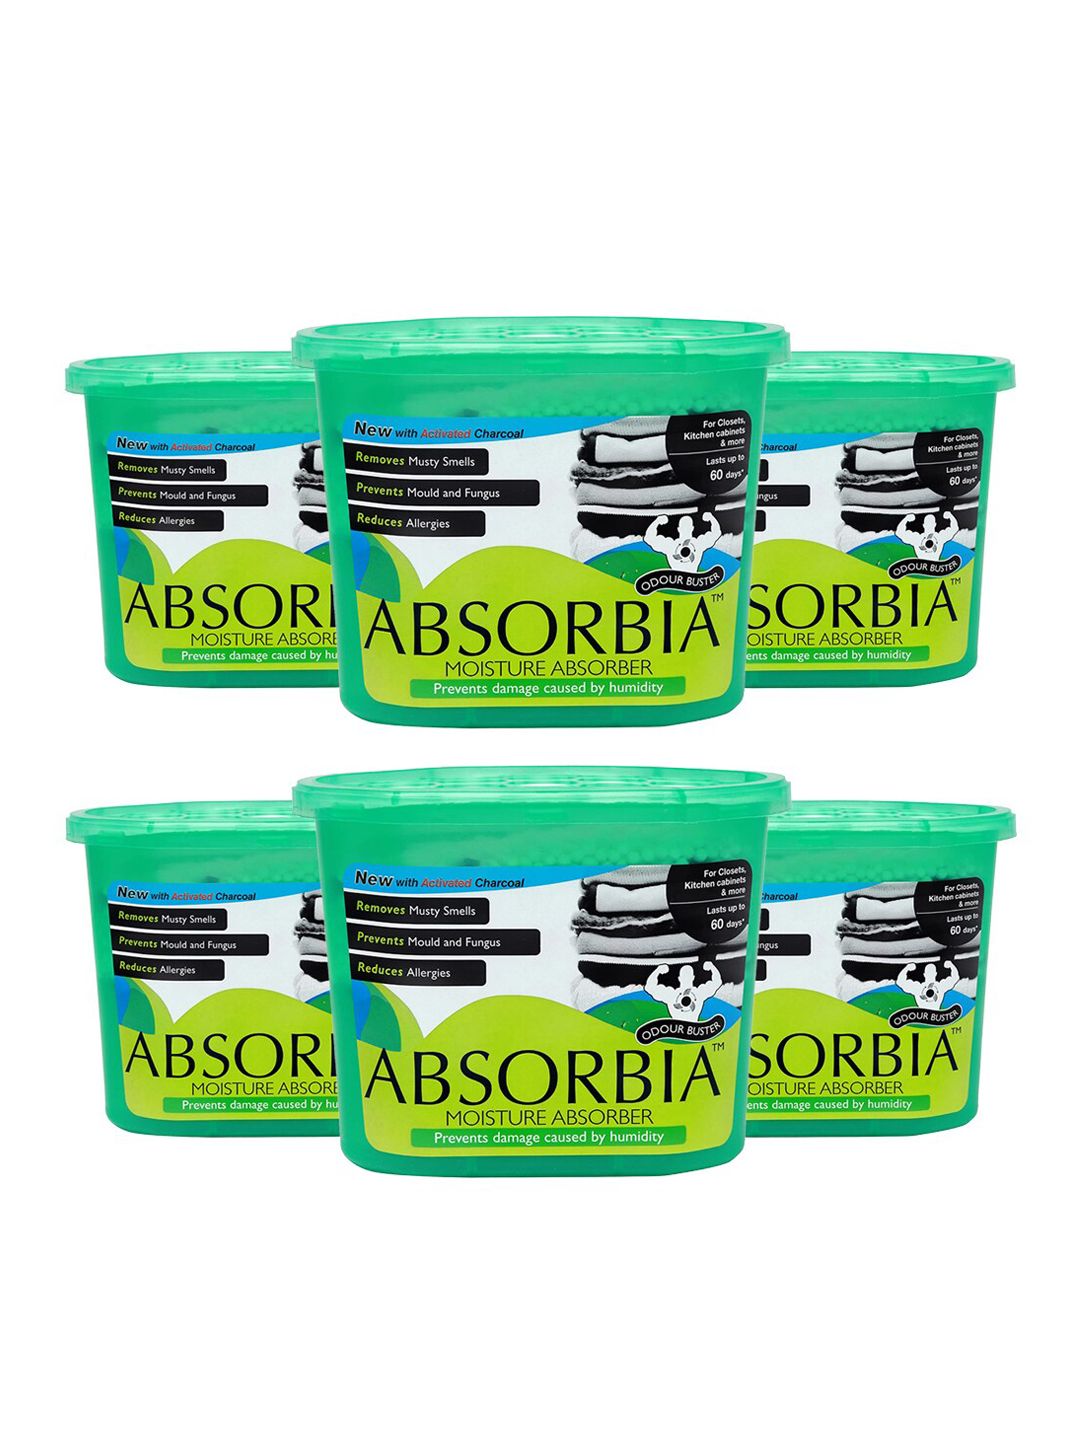 Absorbia Unisex Green Pack of 6 Moisture Absorber & Odour Buster Price in India